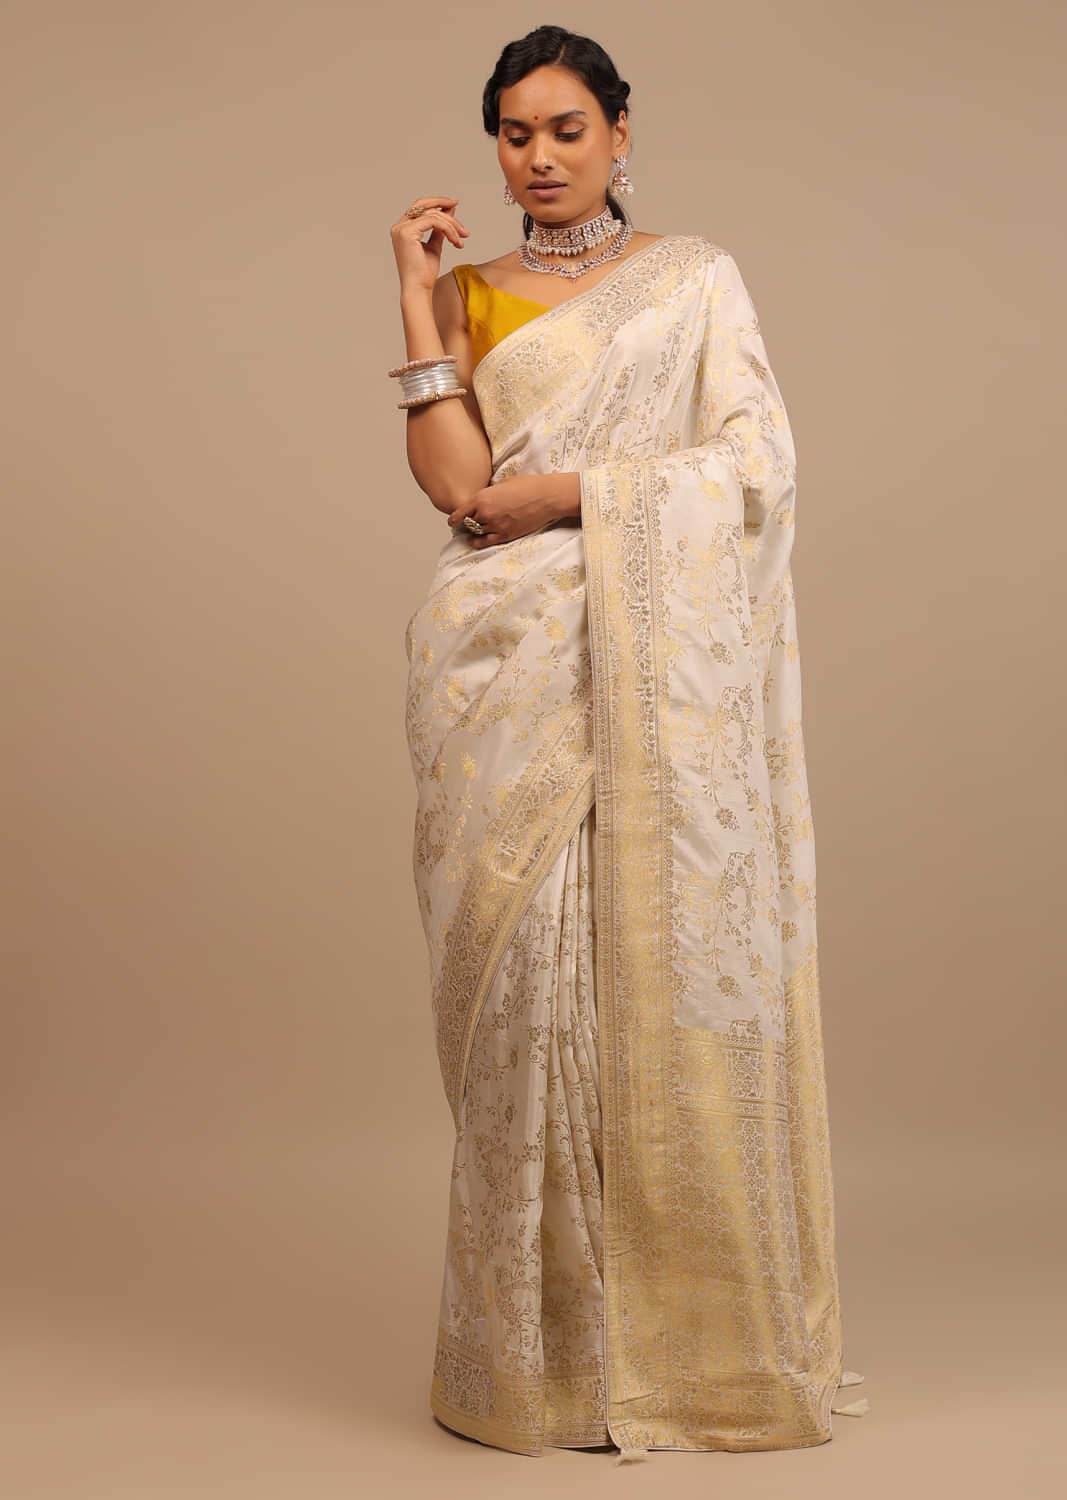 Off-White Saree In Dola Silk With Woven Floral Jaal And Moroccan Weave On Pallu